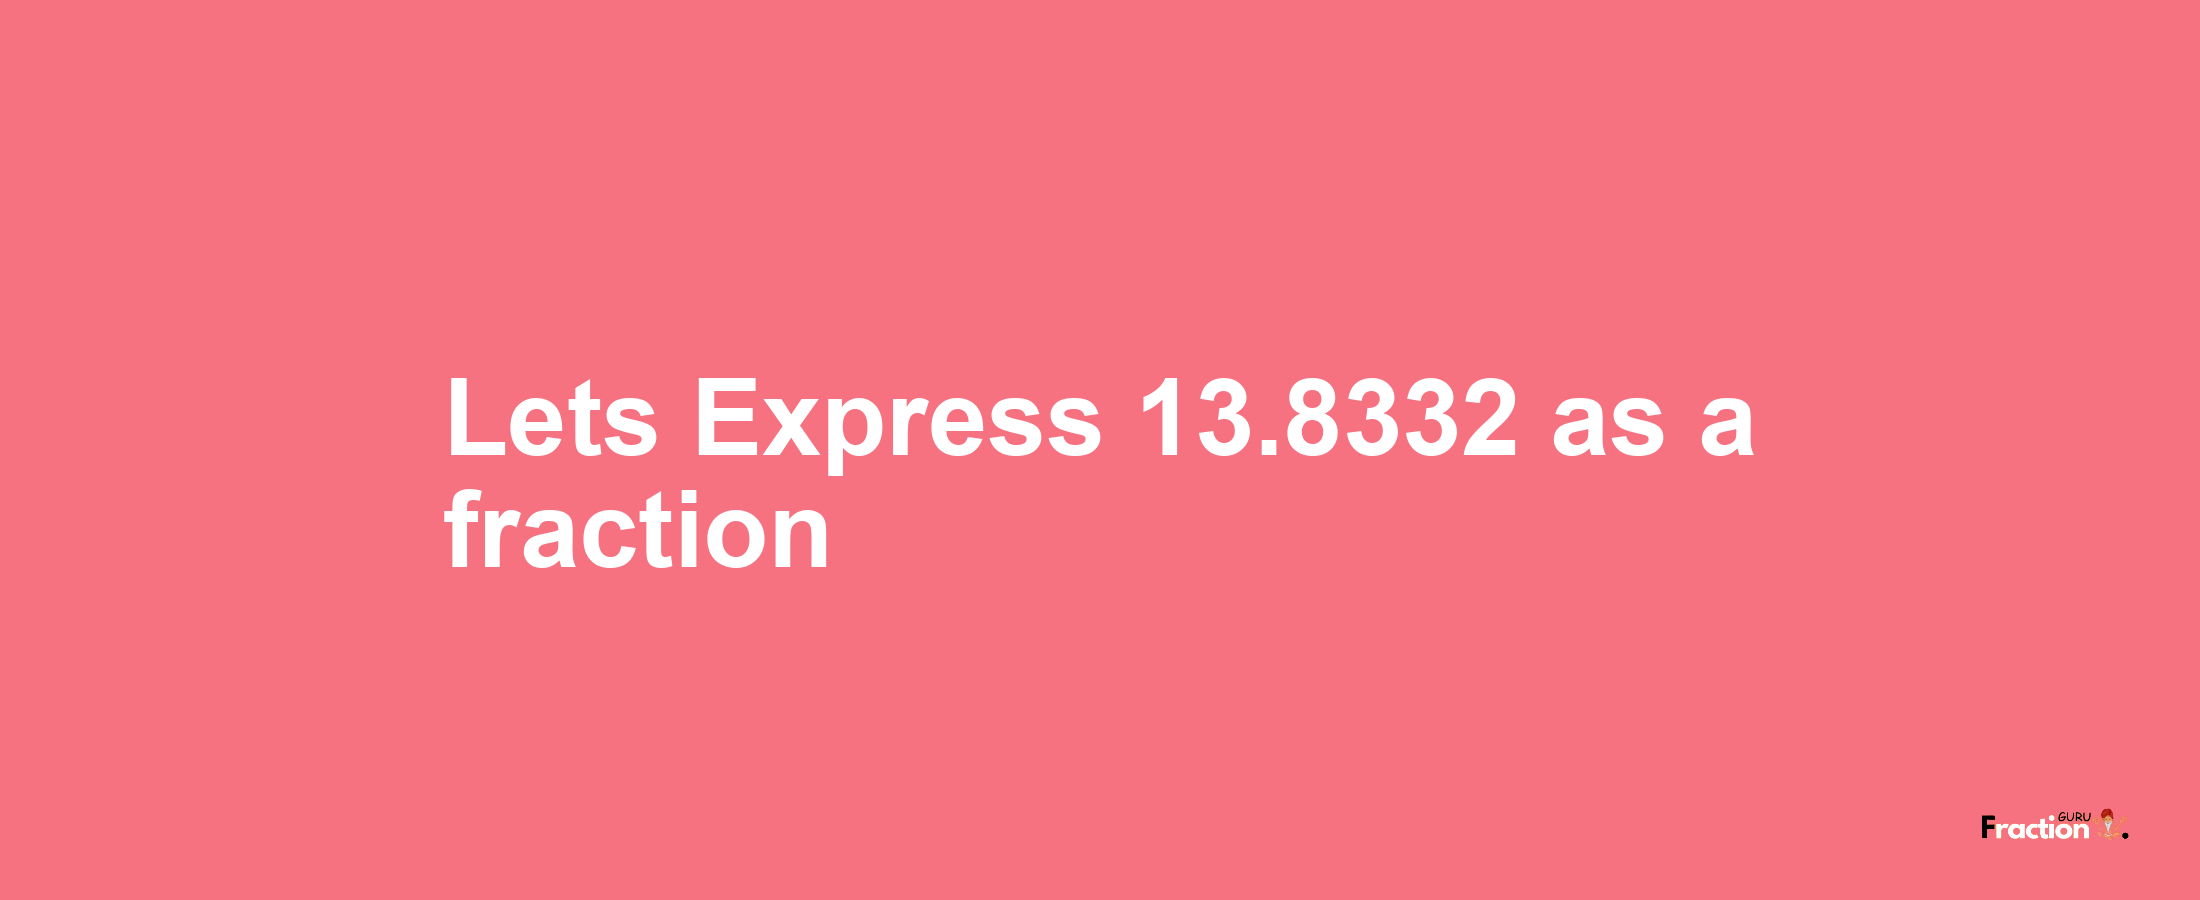 Lets Express 13.8332 as afraction